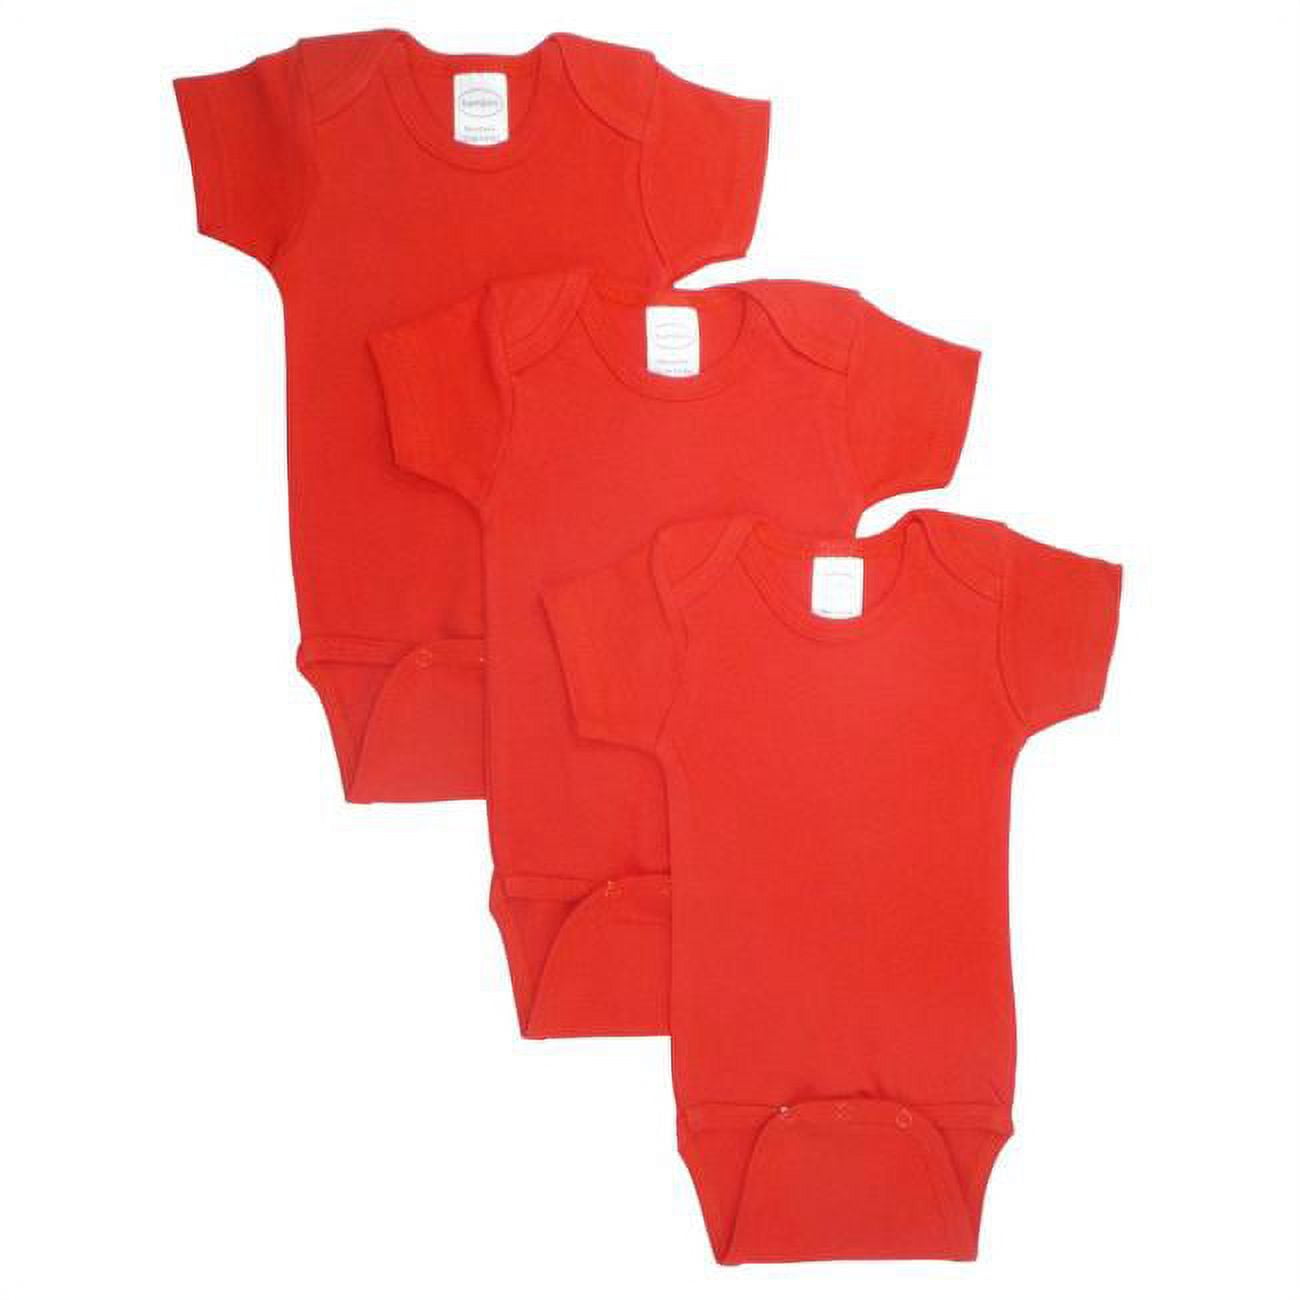 Ls-0152 Short Sleeve Bodysuit - Red, Large - Pack Of 3